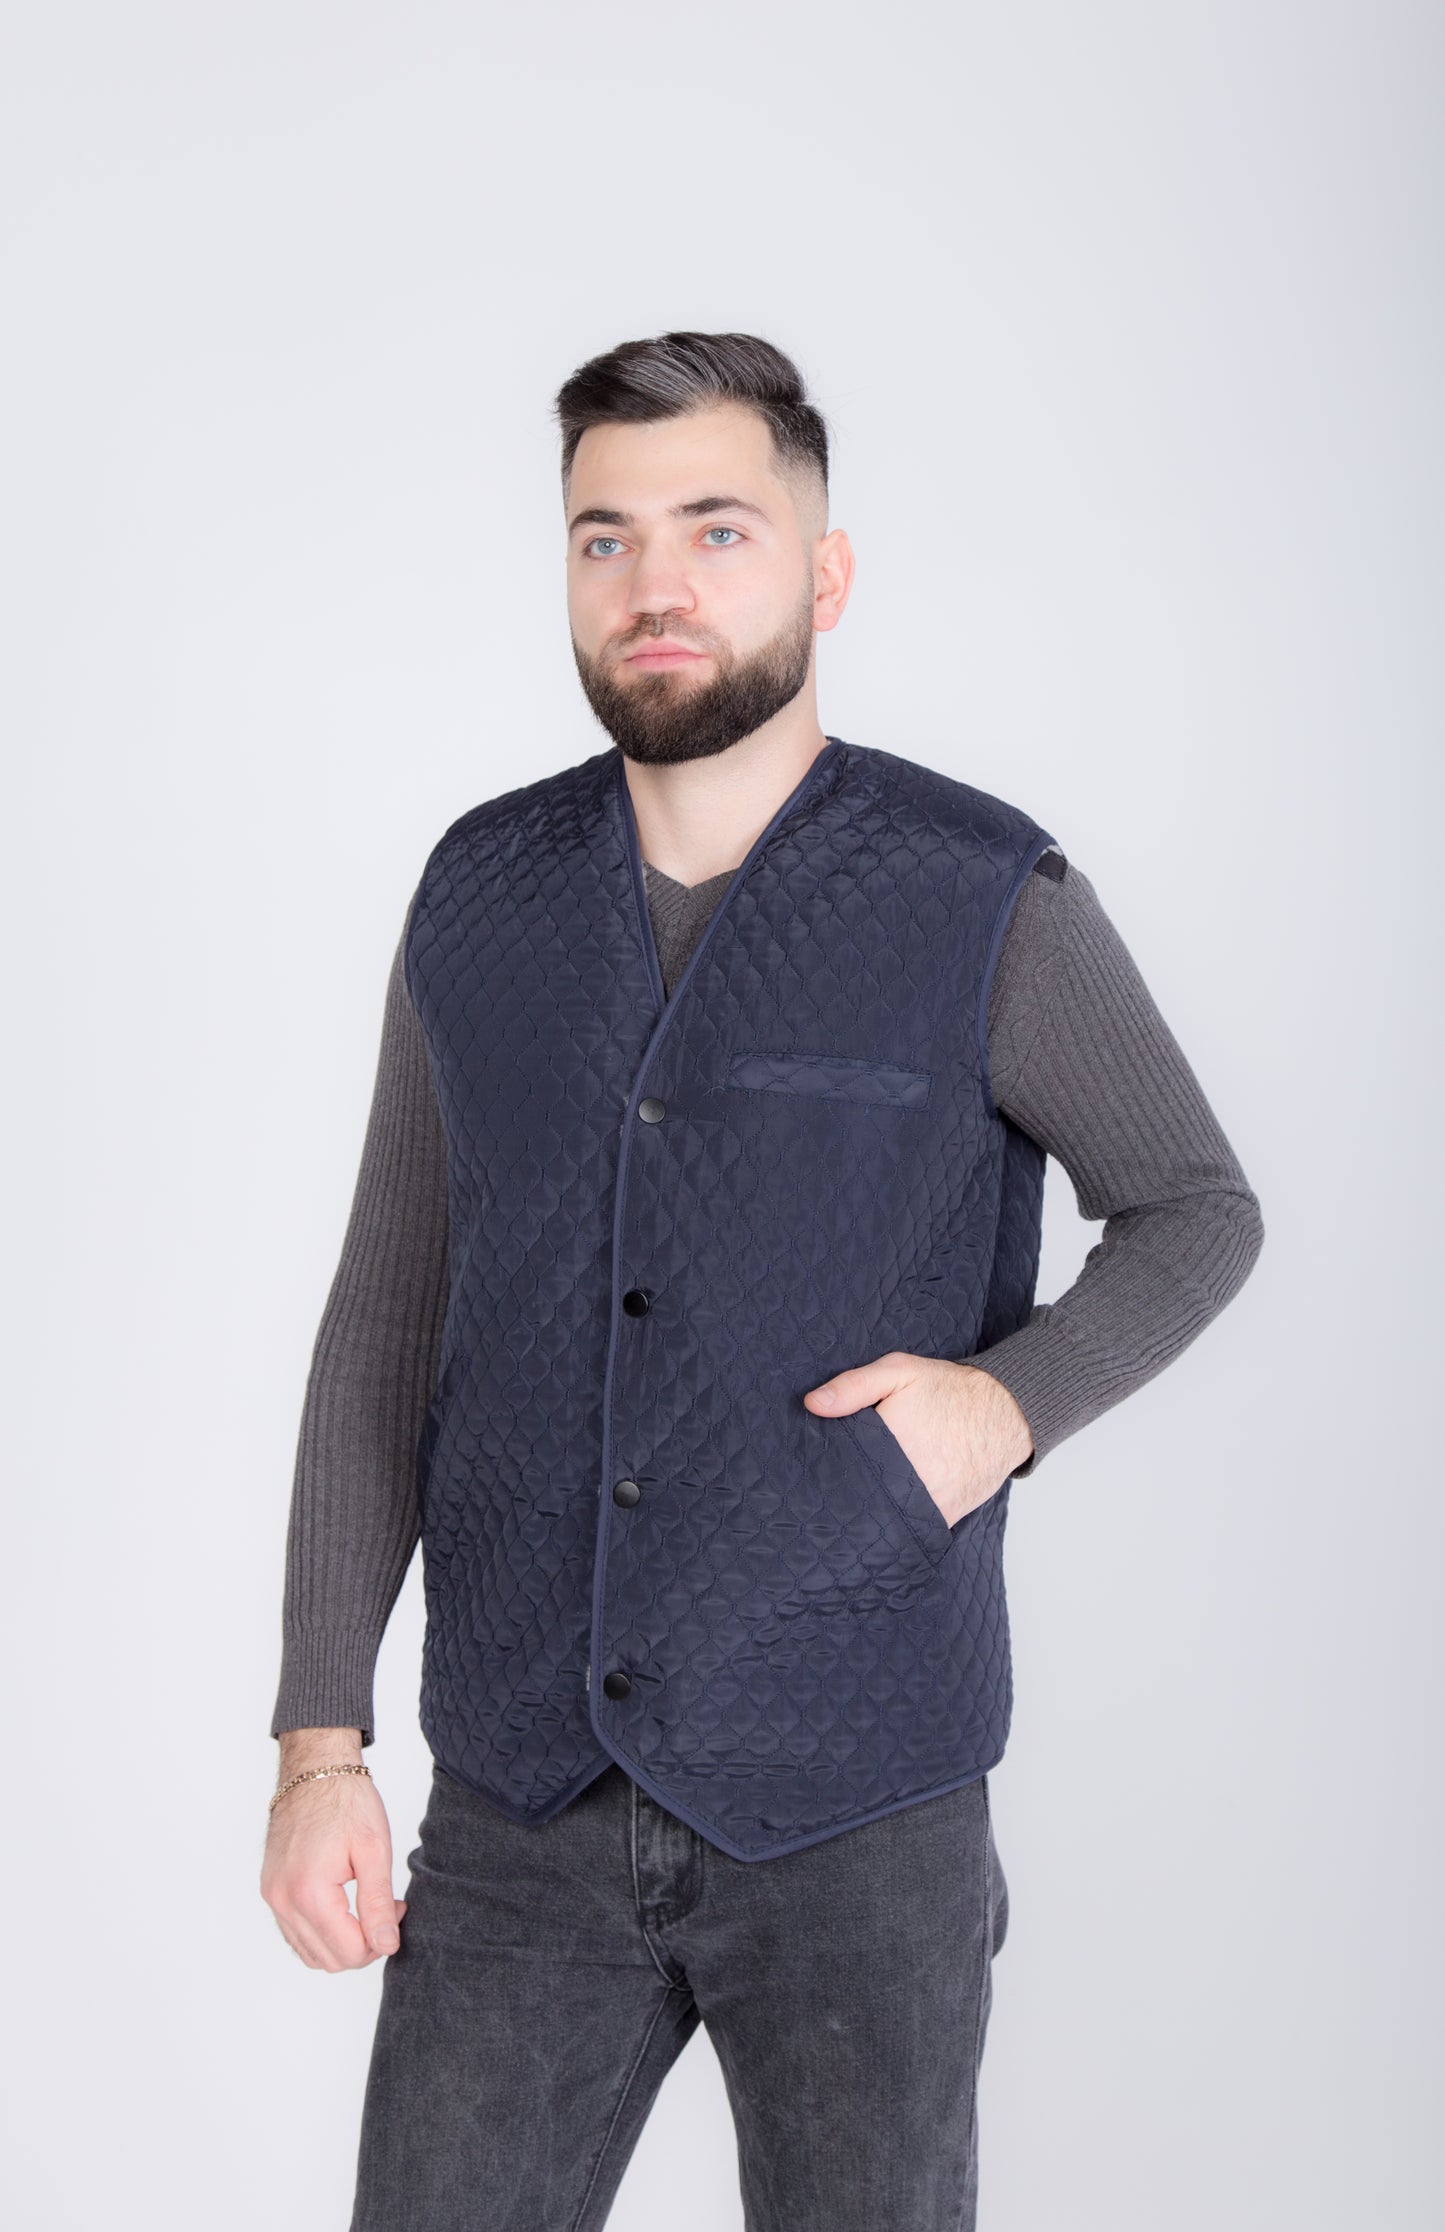 Warm Men Sleeveless Quilted Sheepskin Jacket, Vest Rancher, Western Styling With Pockets